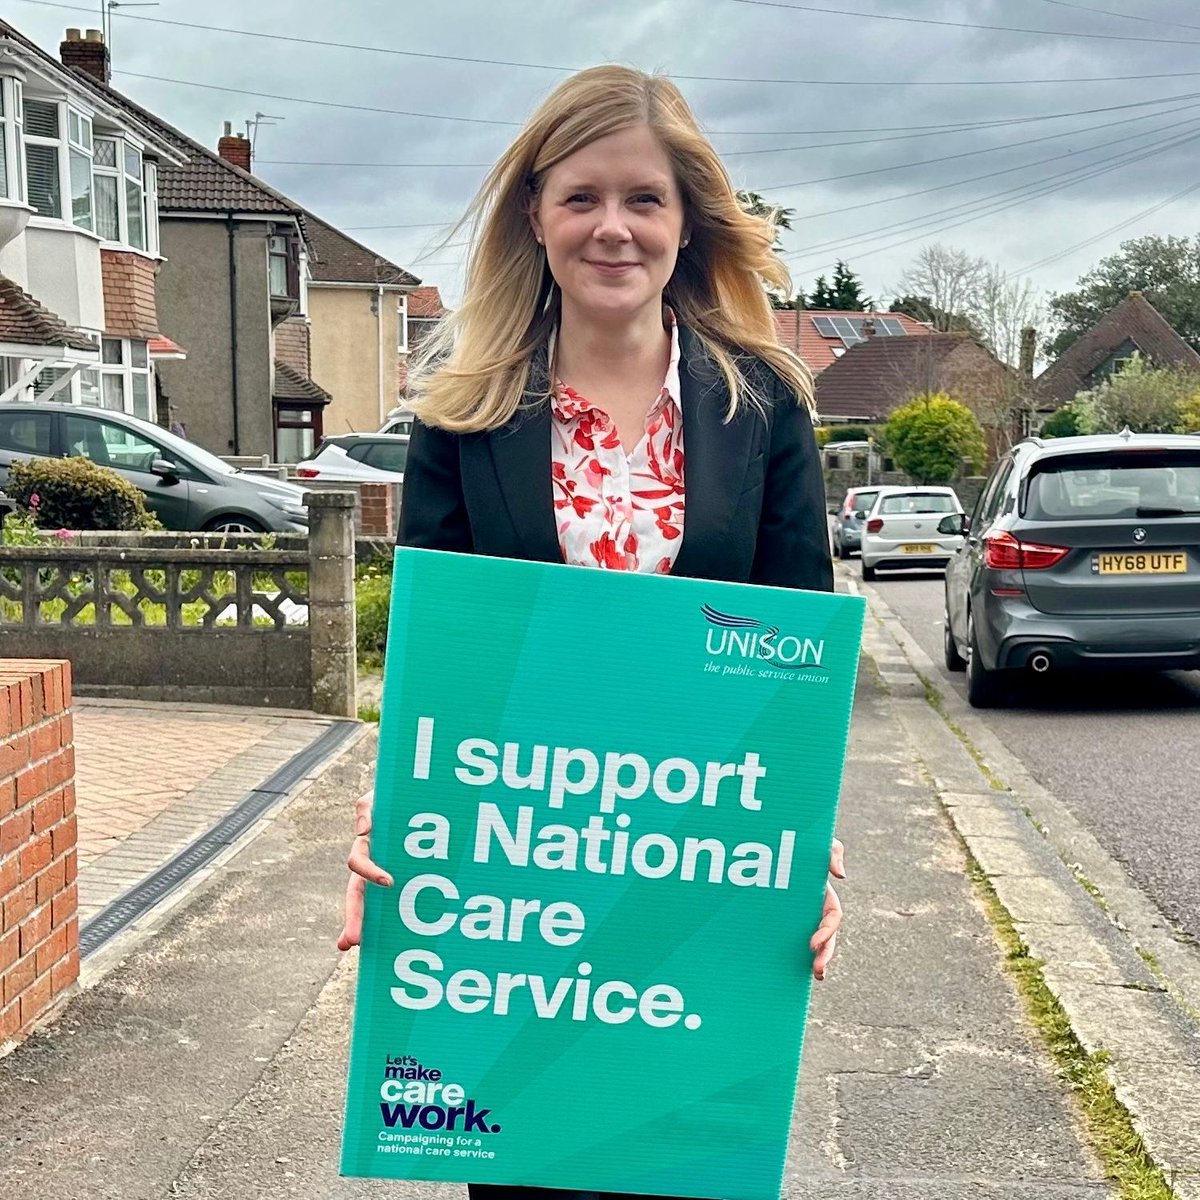 “We know that working people and their families need a National Care Service.” @CHazelgrove, Labour's parliamentary candidate for Filton & Bradley Stoke, is backing @UNISONtheunion's call for a National Care Service. #LetsMakeCareWork